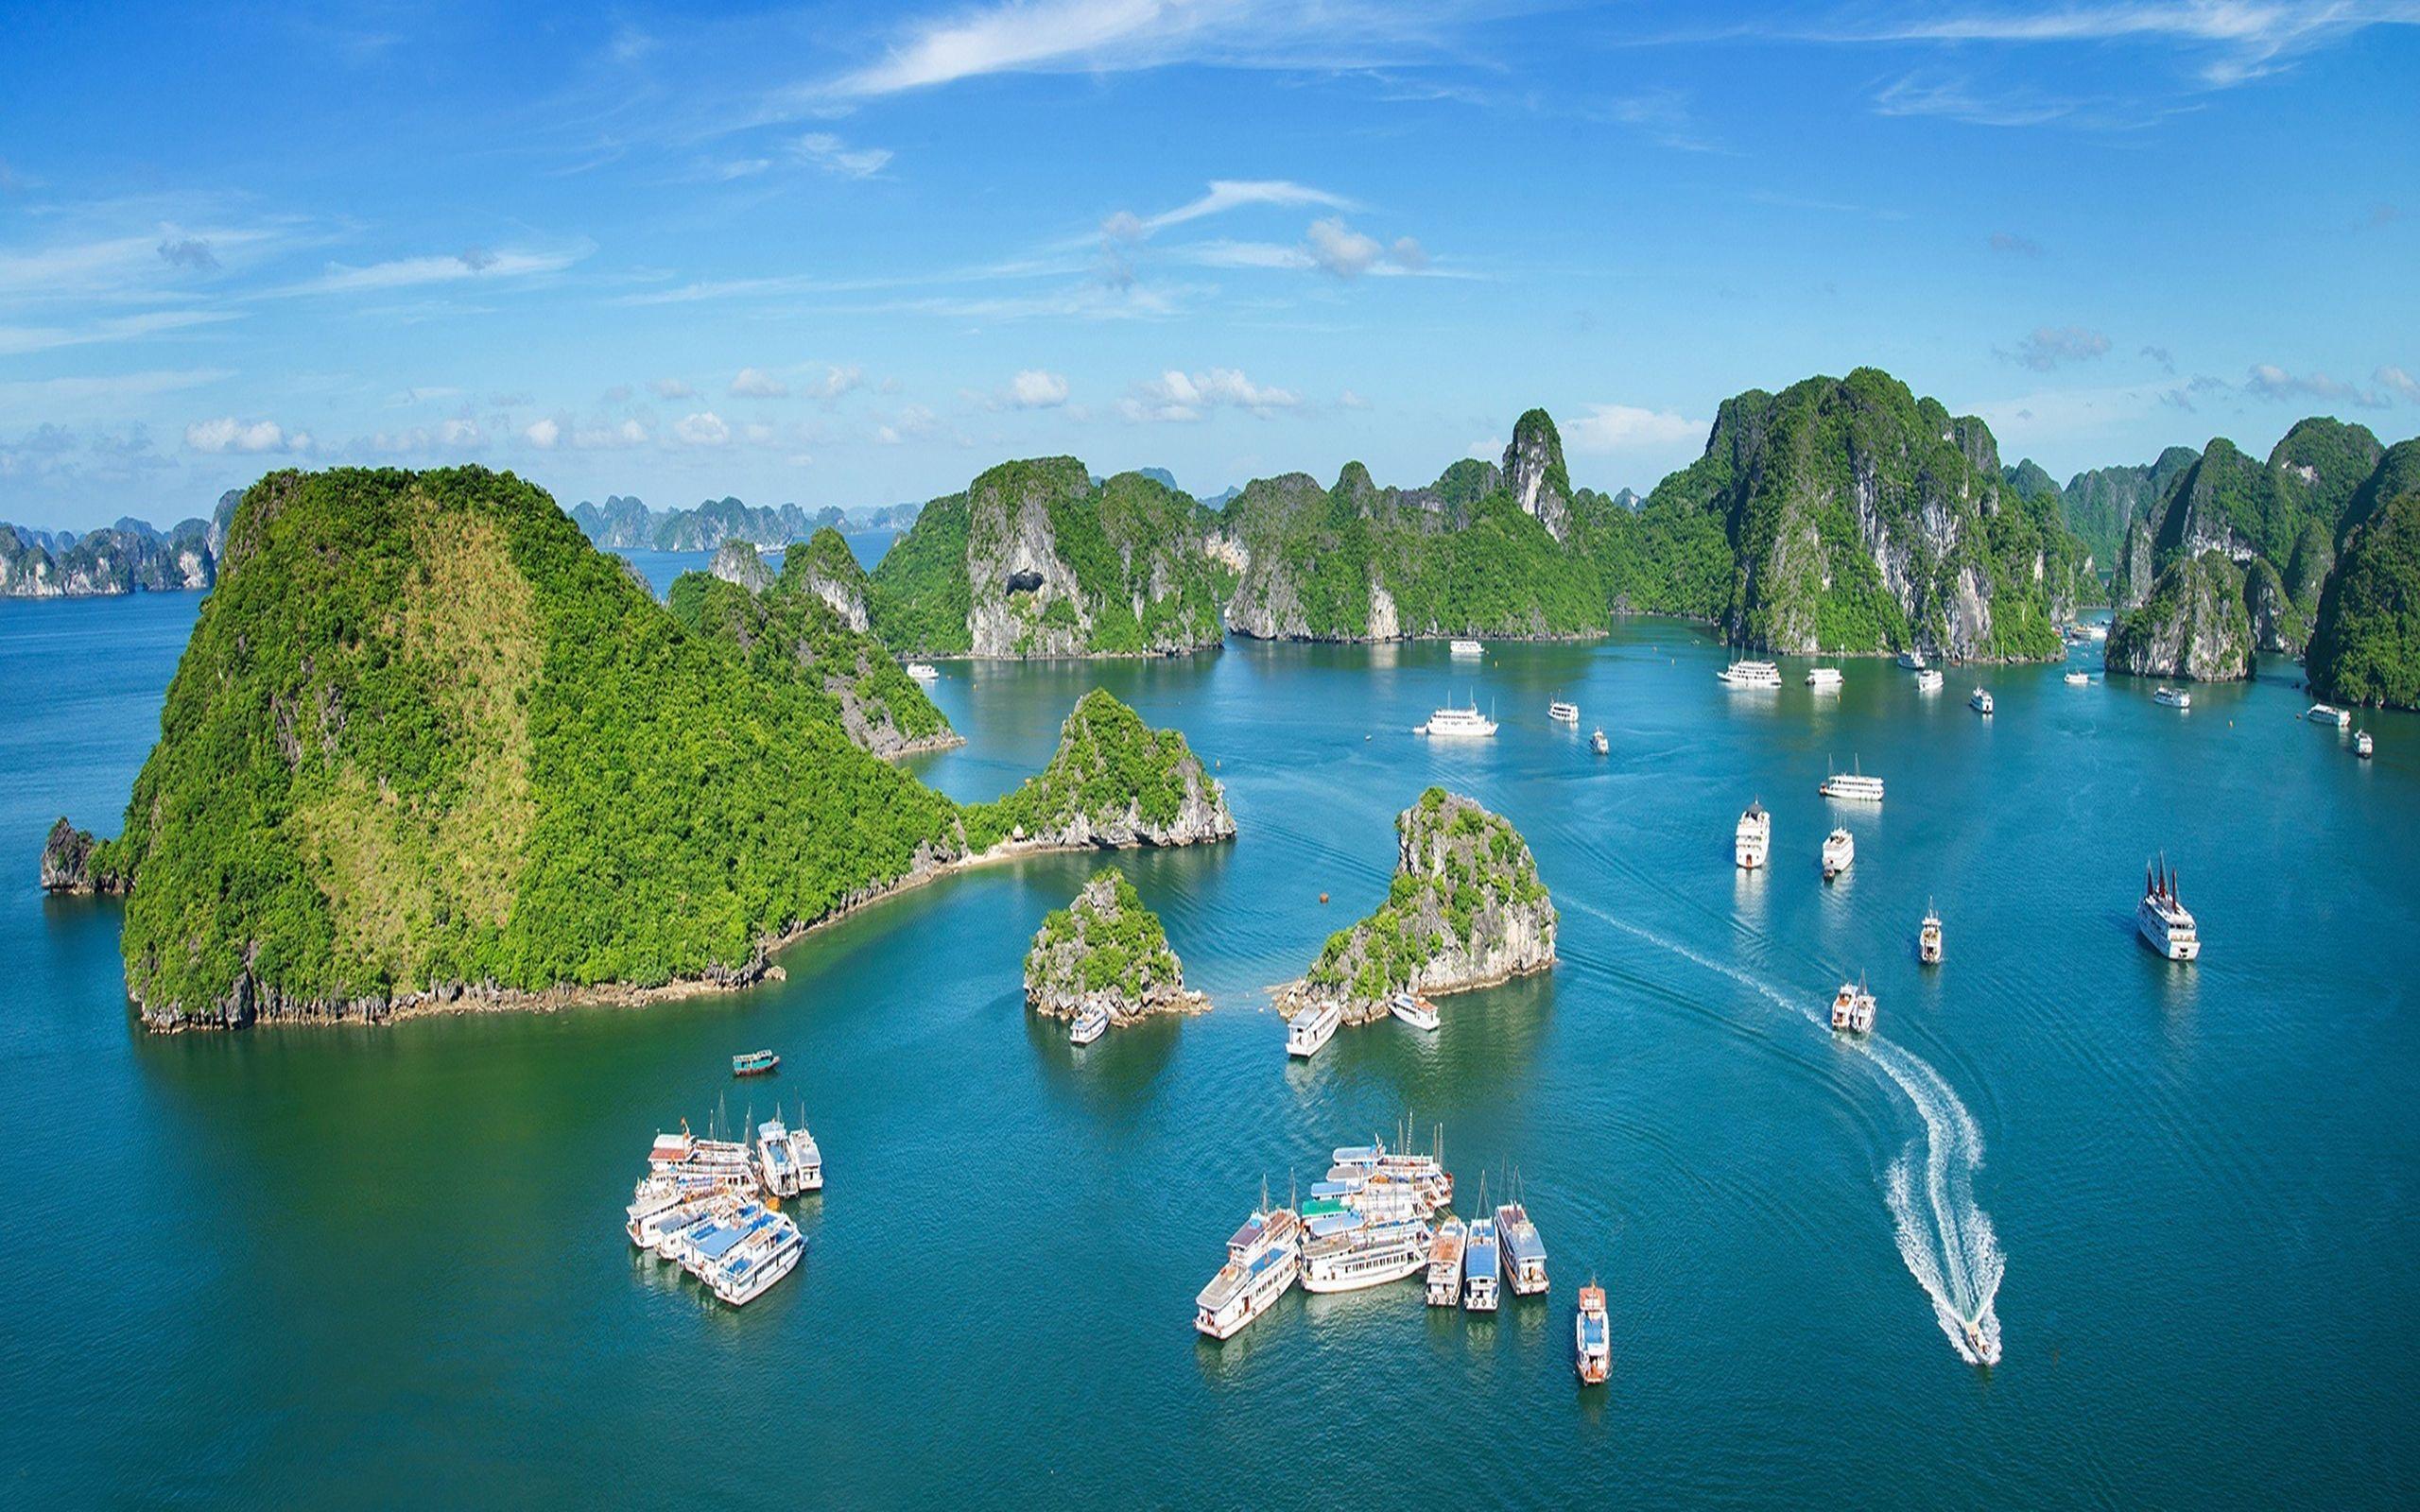 Boats in Halong Bay, Vietnam HD Wallpaper. Background Image